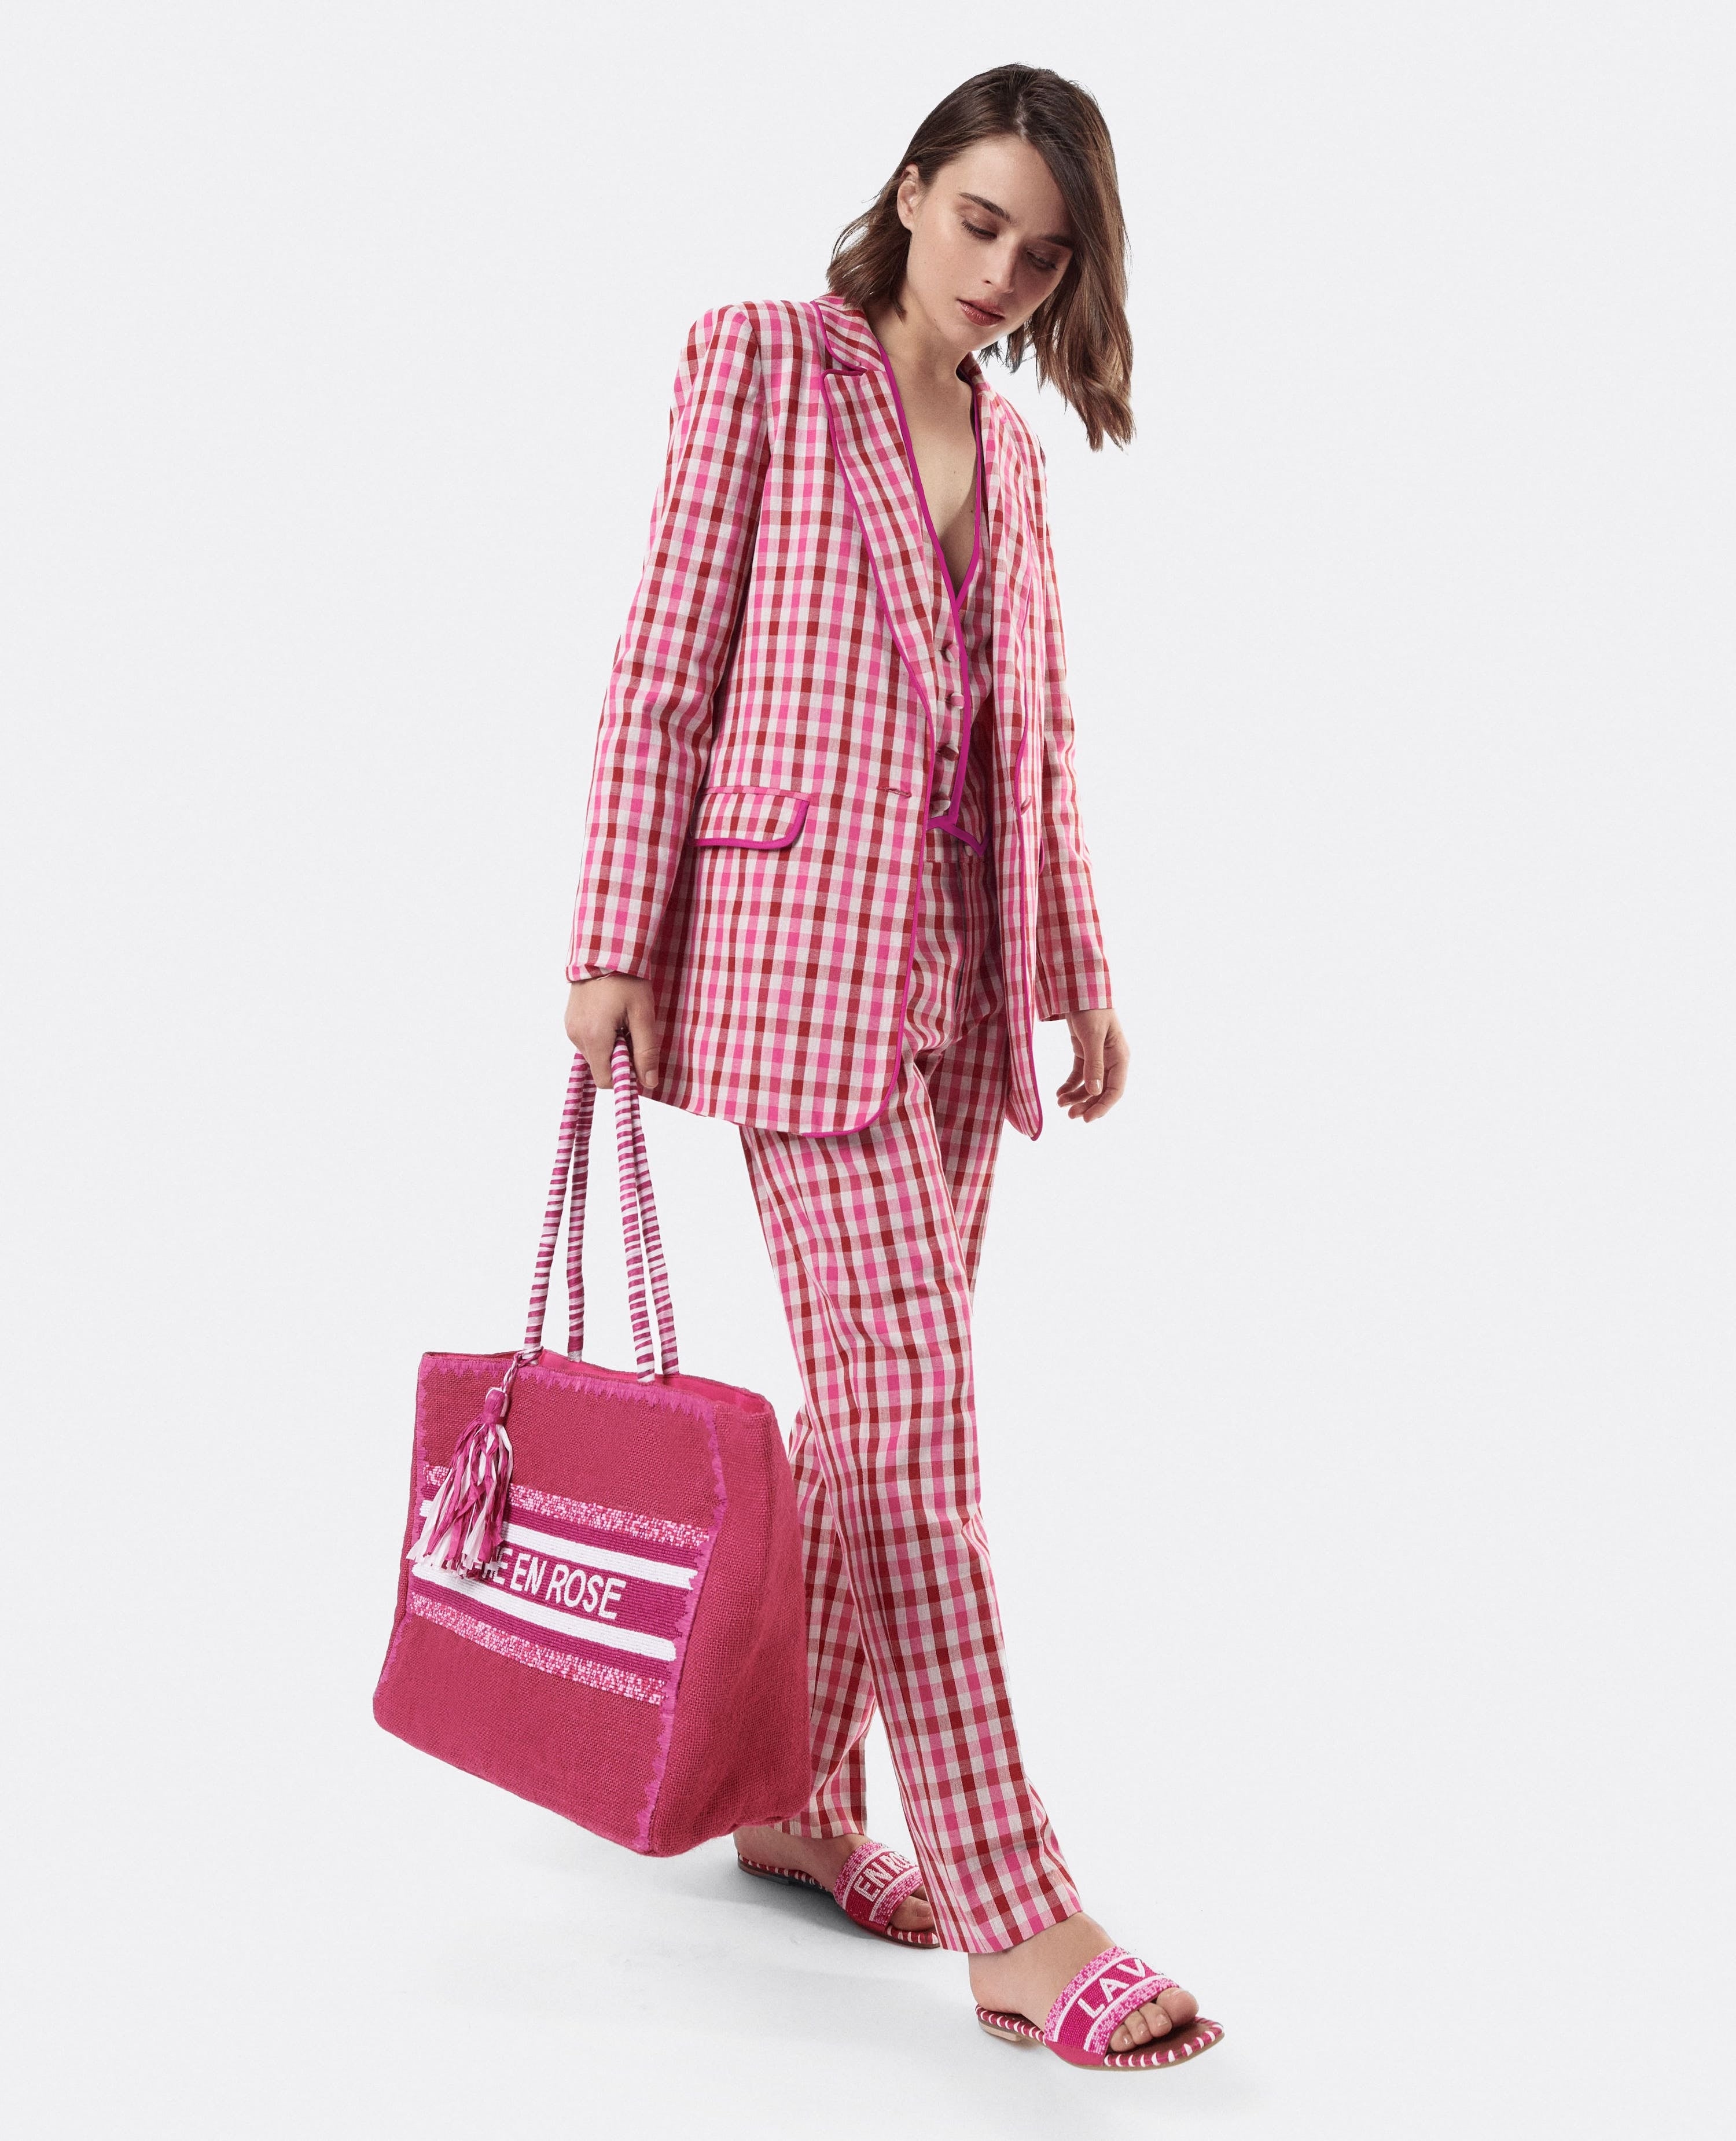 NUR ITALY CUPLE Pink Checked Suit Pants, color, RED, WHITE, PINK